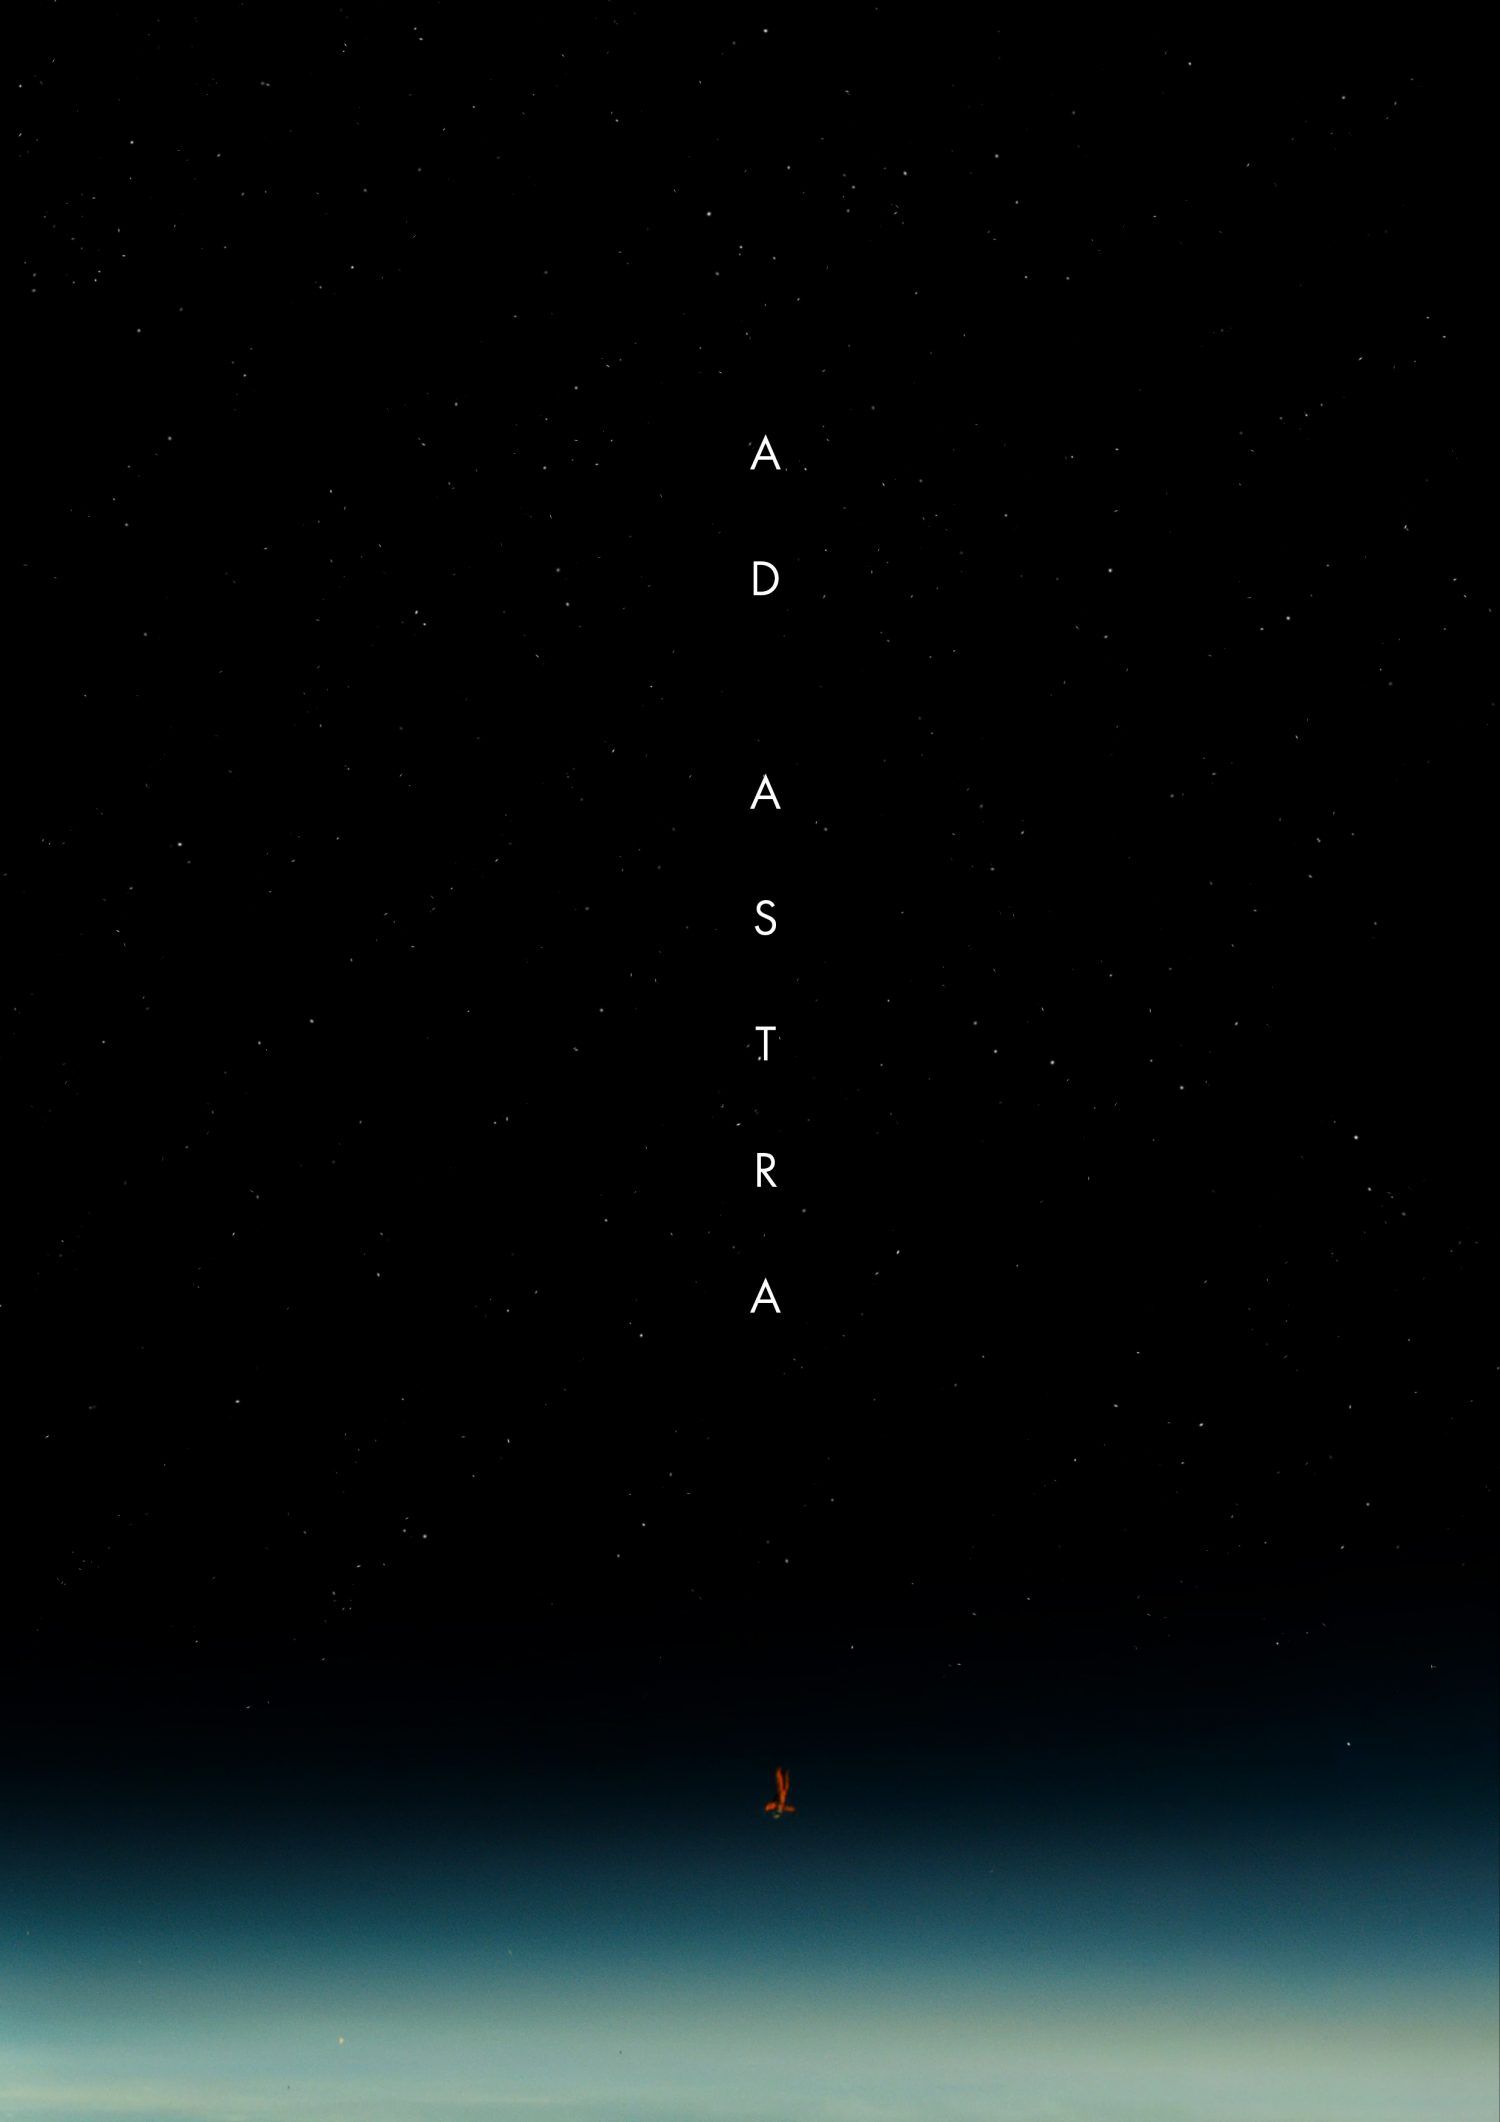 Ad Astra 2019 Movie Poster Wallpapers